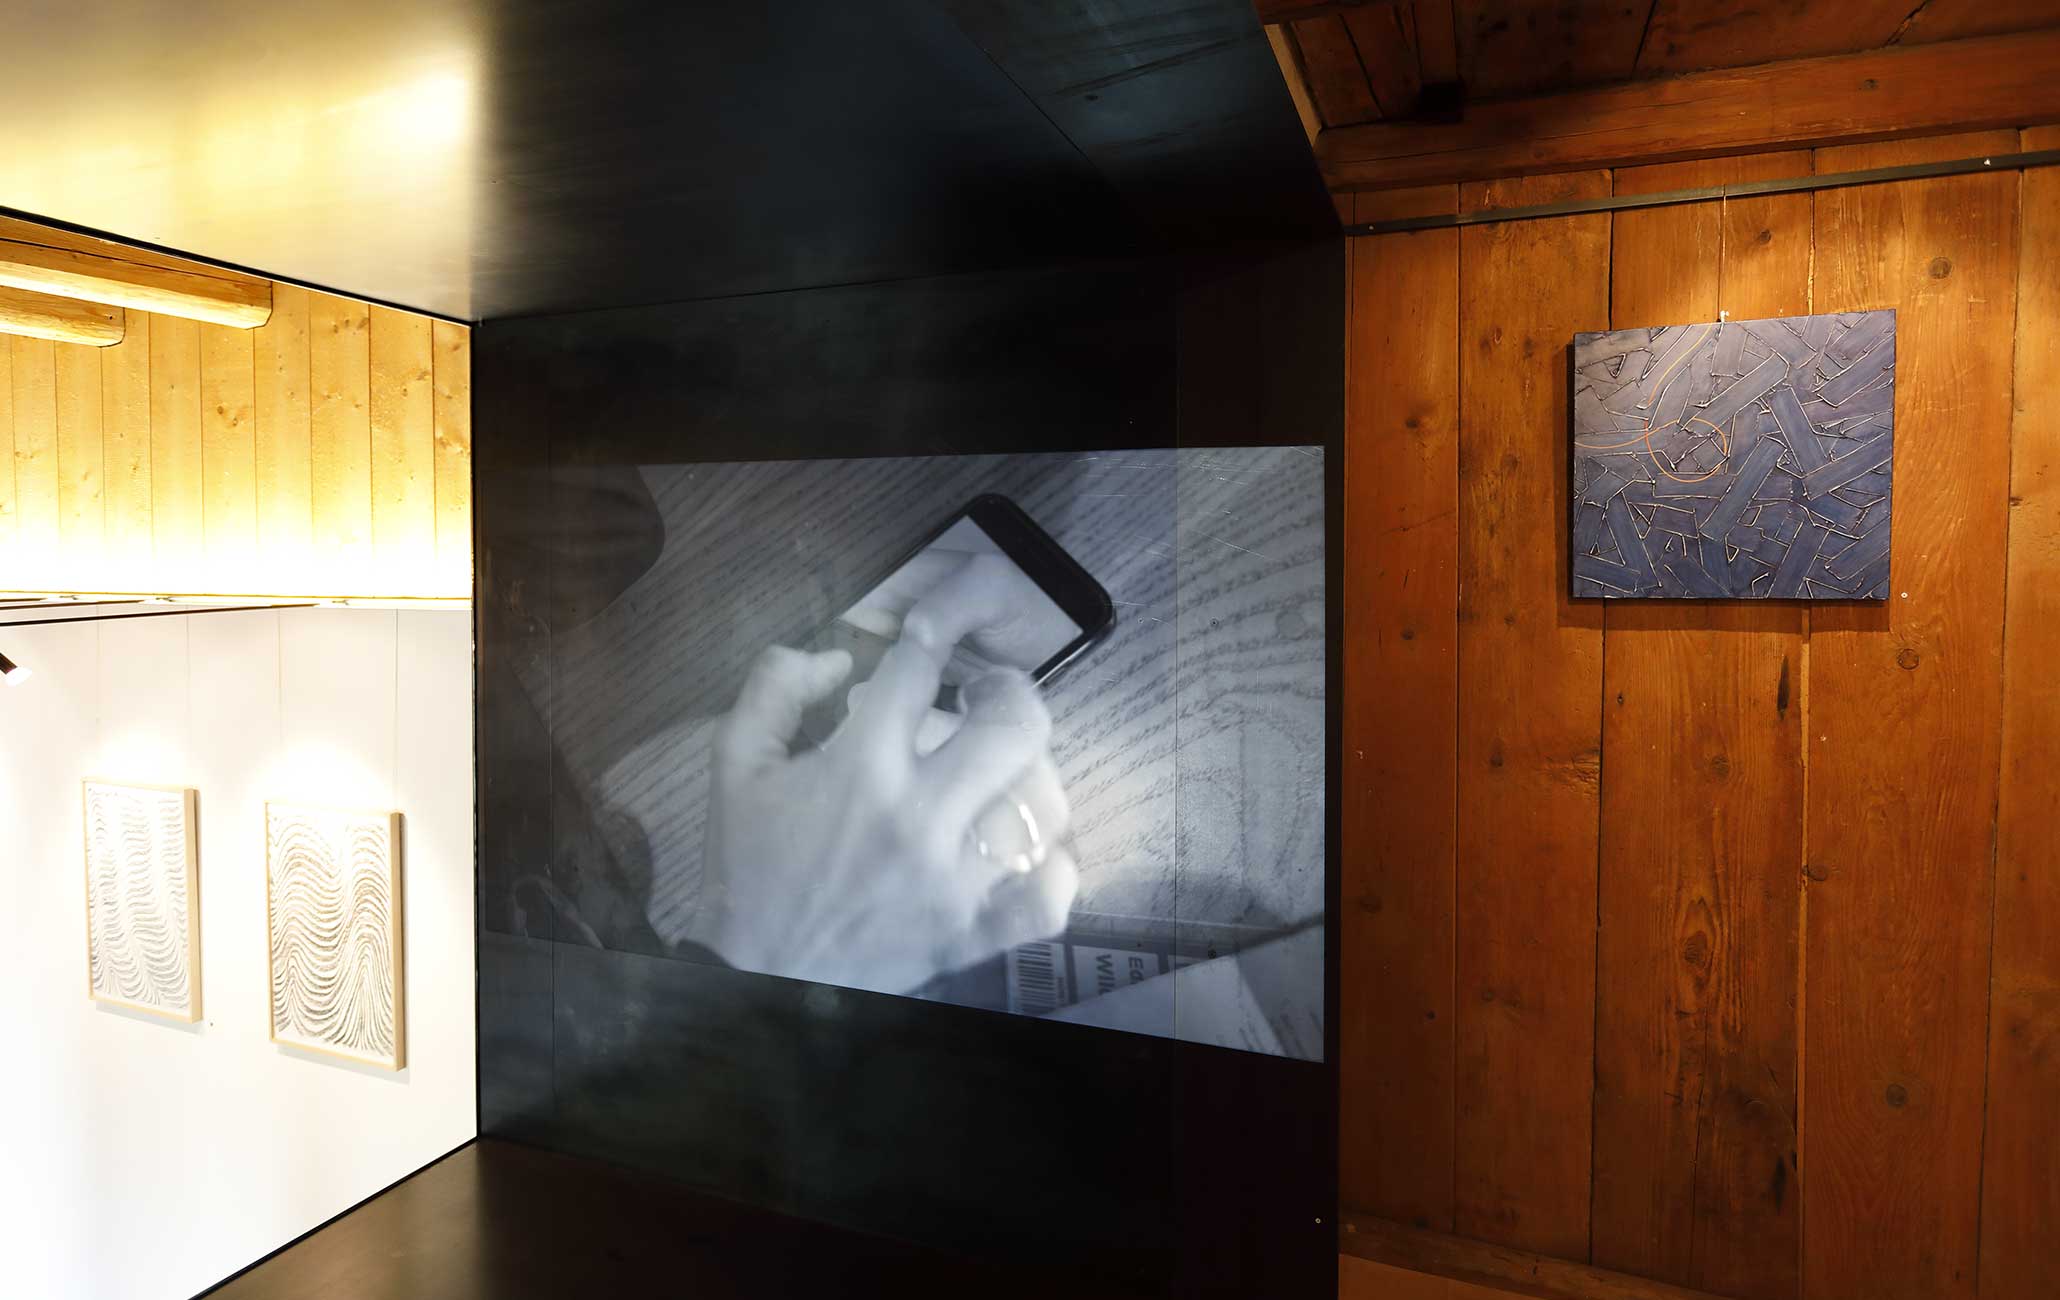 Exhibition 'Felix Thyes – Ad Infinitum', Kulturschüür Männedorf, CH, 2019. Center: Myriam Thyes, Smart Pantheon (2016), HD video. Left: Felix Thyes, drawings of 2017, charcoal (and pastels) on paper. Right: Vanessa Thyes, 'Blues' (2018), tempera on canvas.